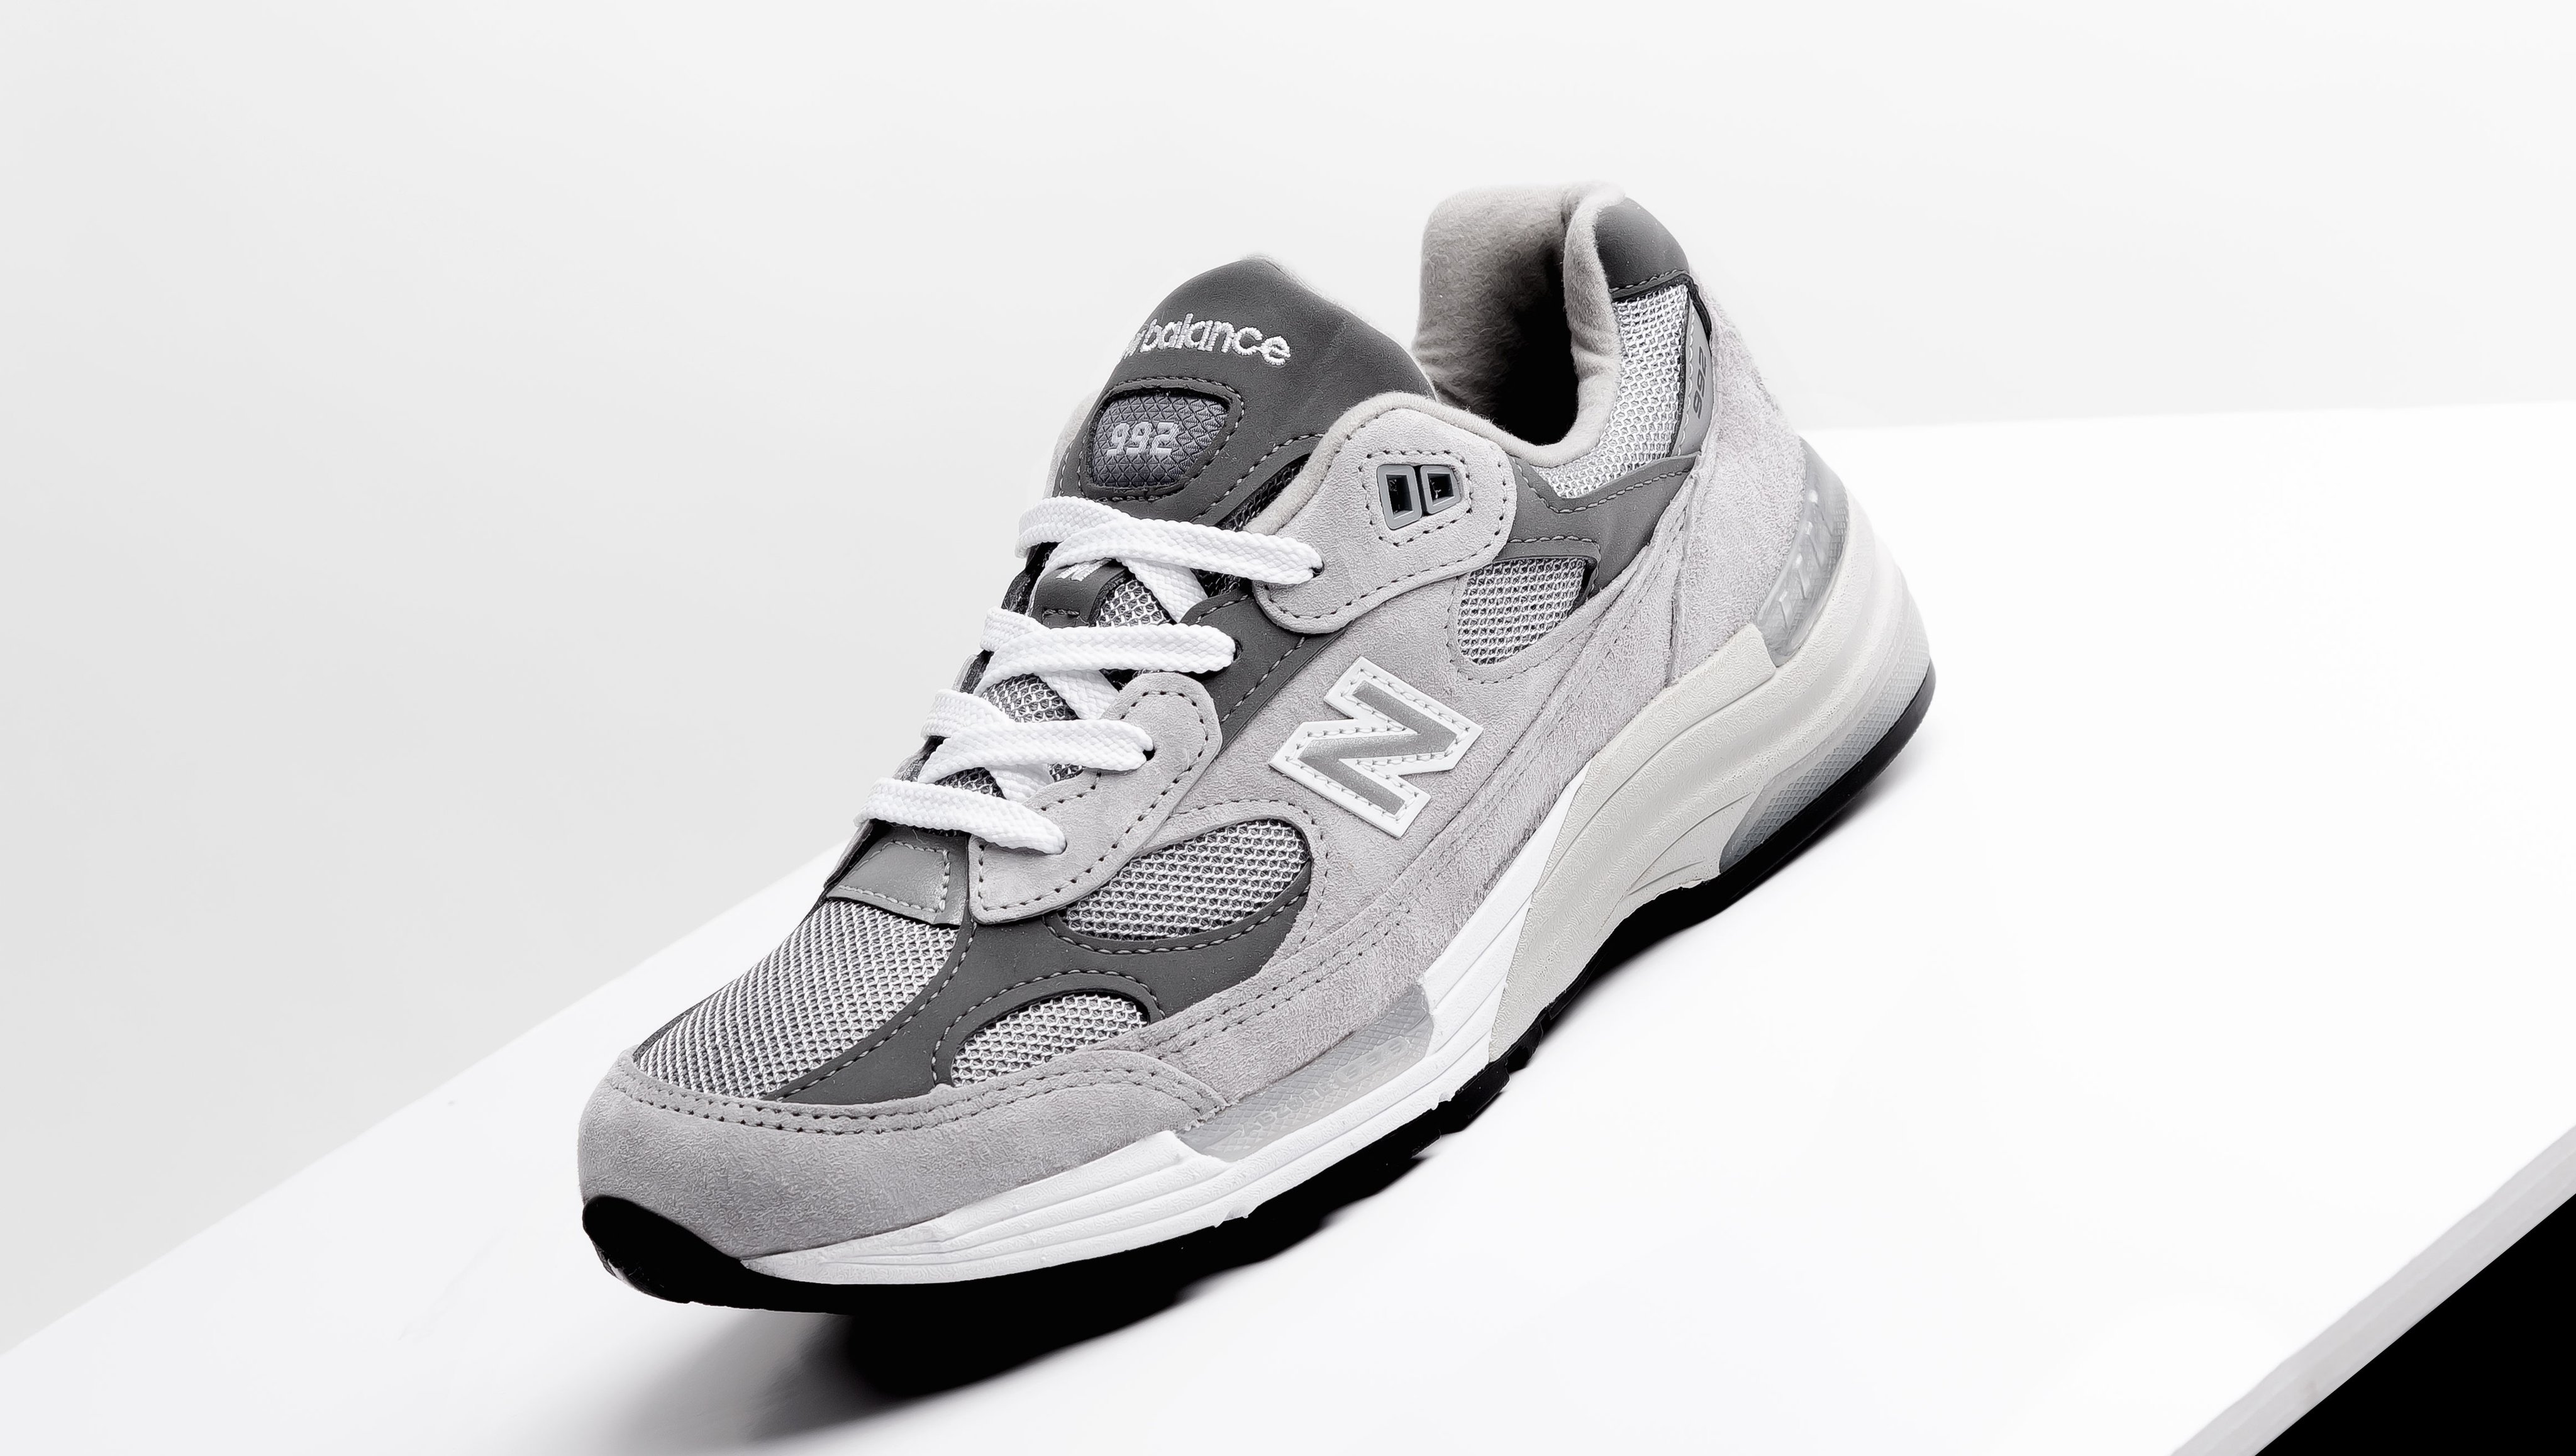 FOOTDISTRICT on Twitter: "The @newbalance 992 is back! combines the latest technology with iconic made in USA craftmanship - now the ultimate dad shoe. Available online in-store (Barcelona